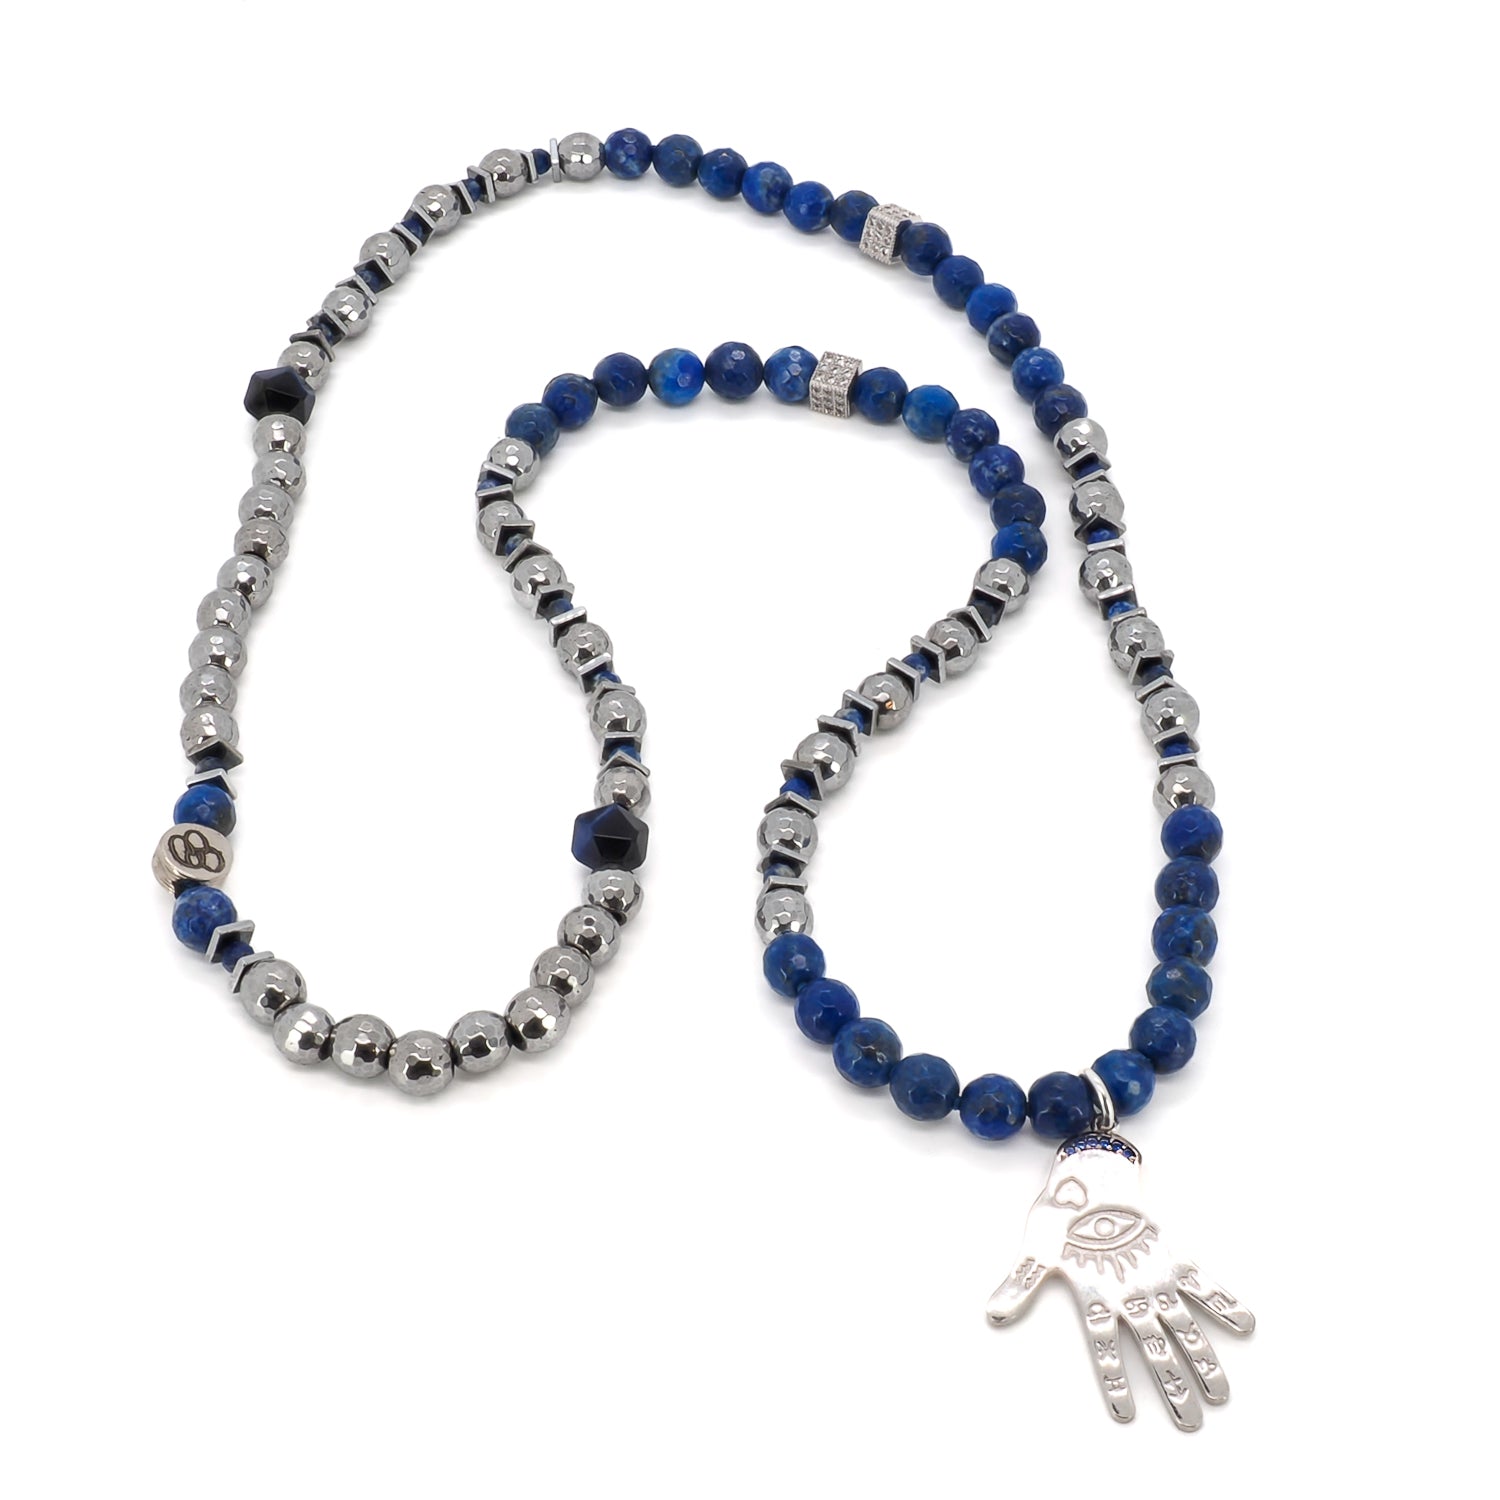 Handcrafted Hamsa Necklace with Lapis Lazuli - Embrace the energy of protection and inner peace.